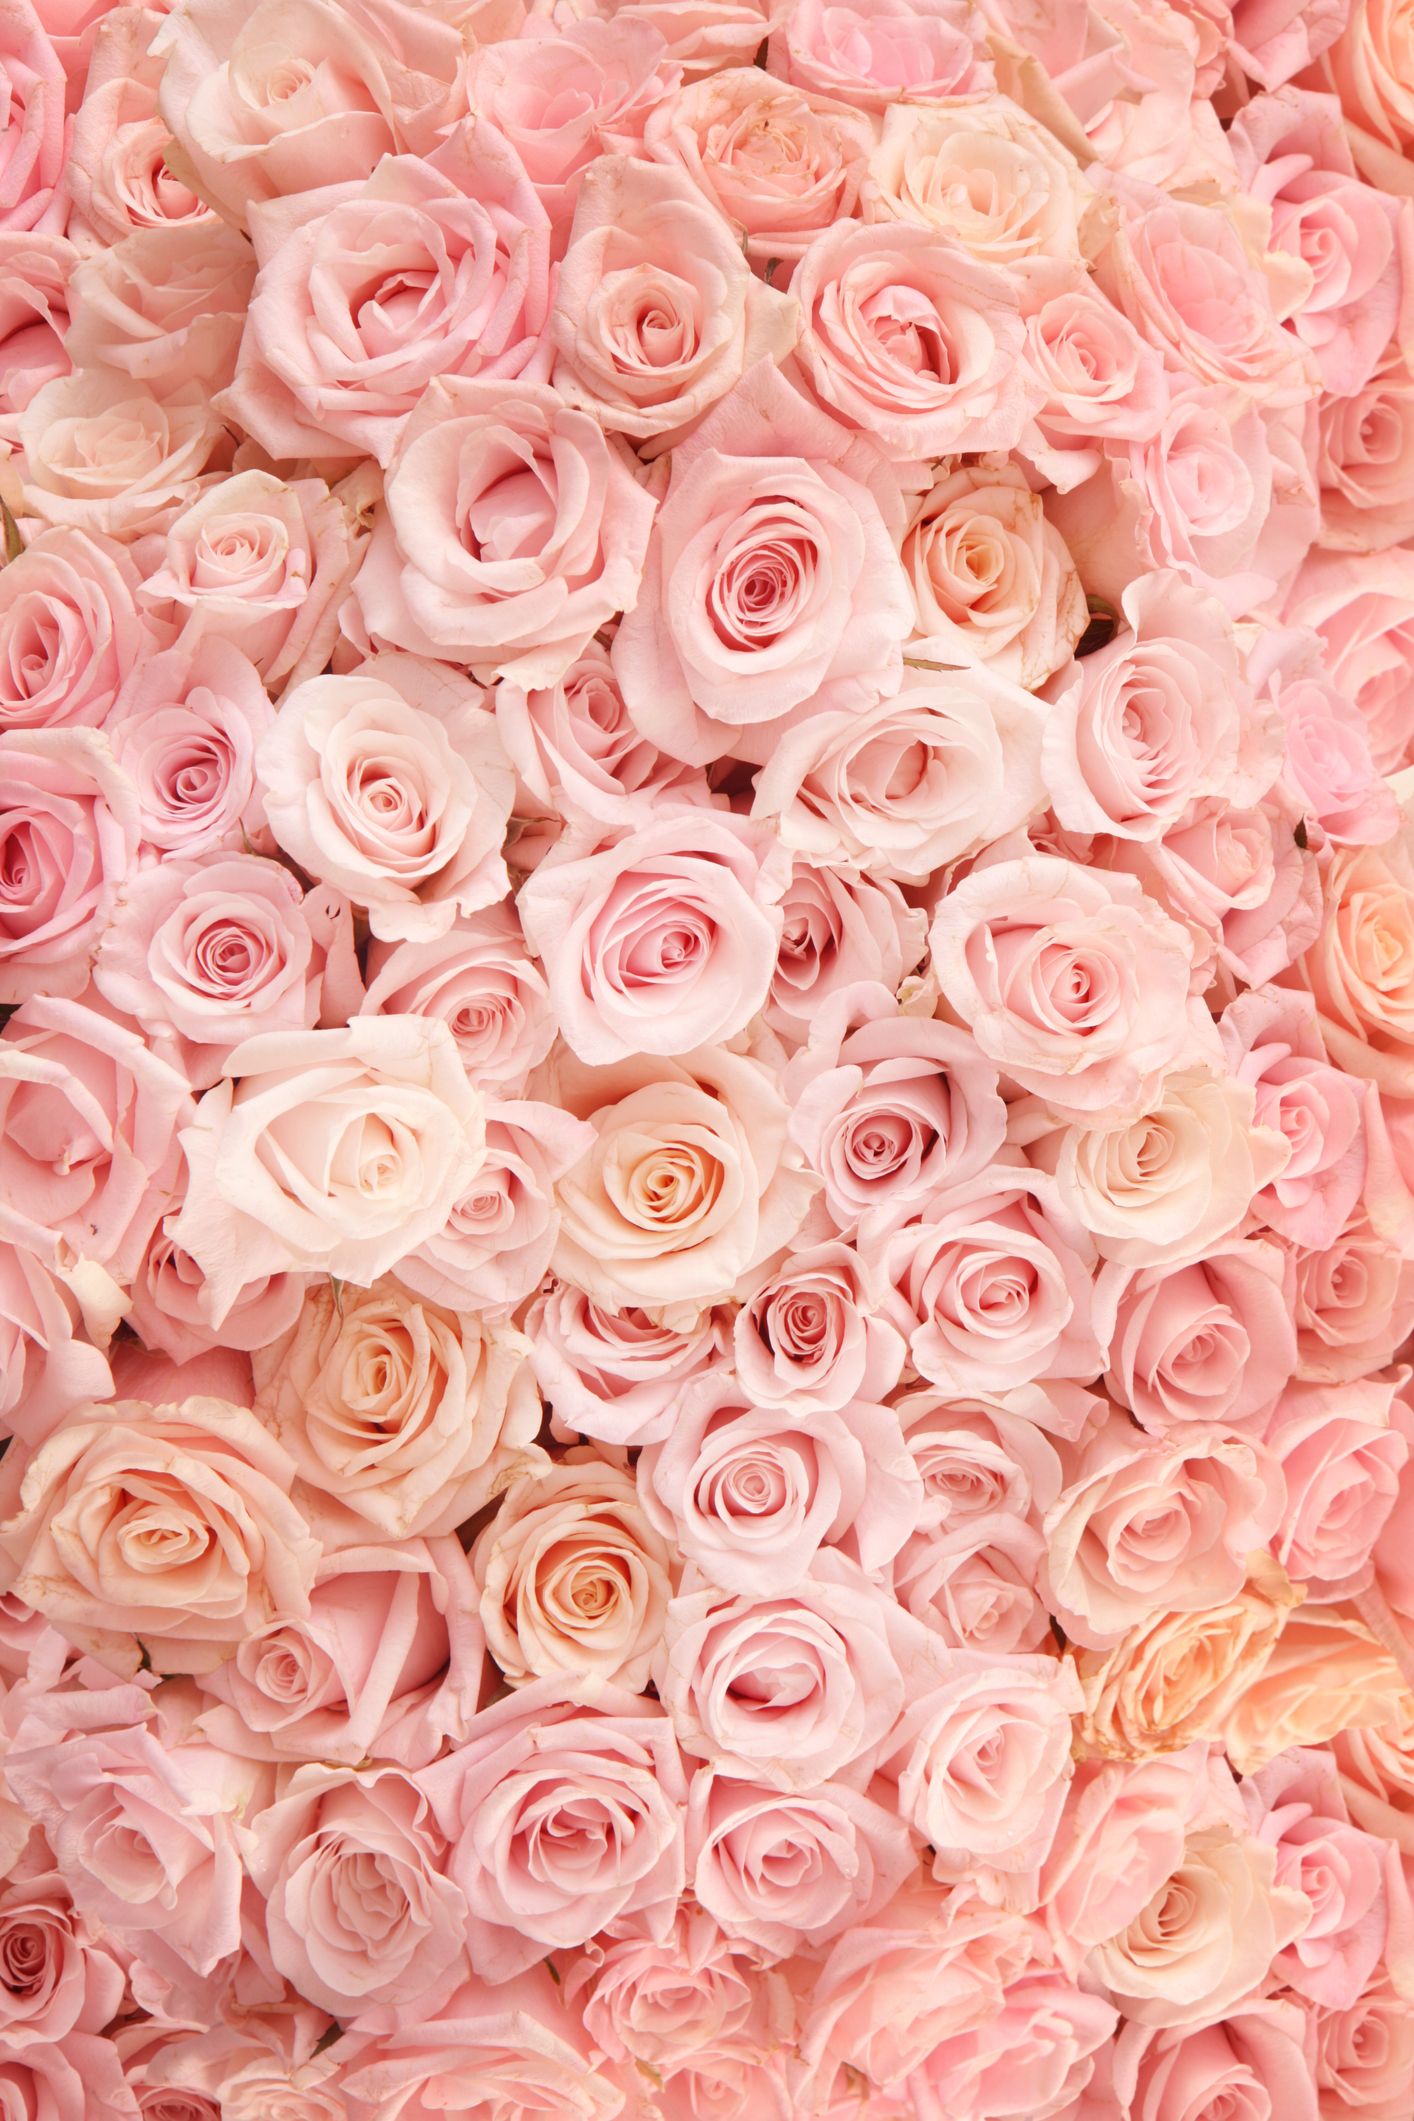 30 Special Rose Color Meanings - Beautiful Flowers For Valentine'S Day